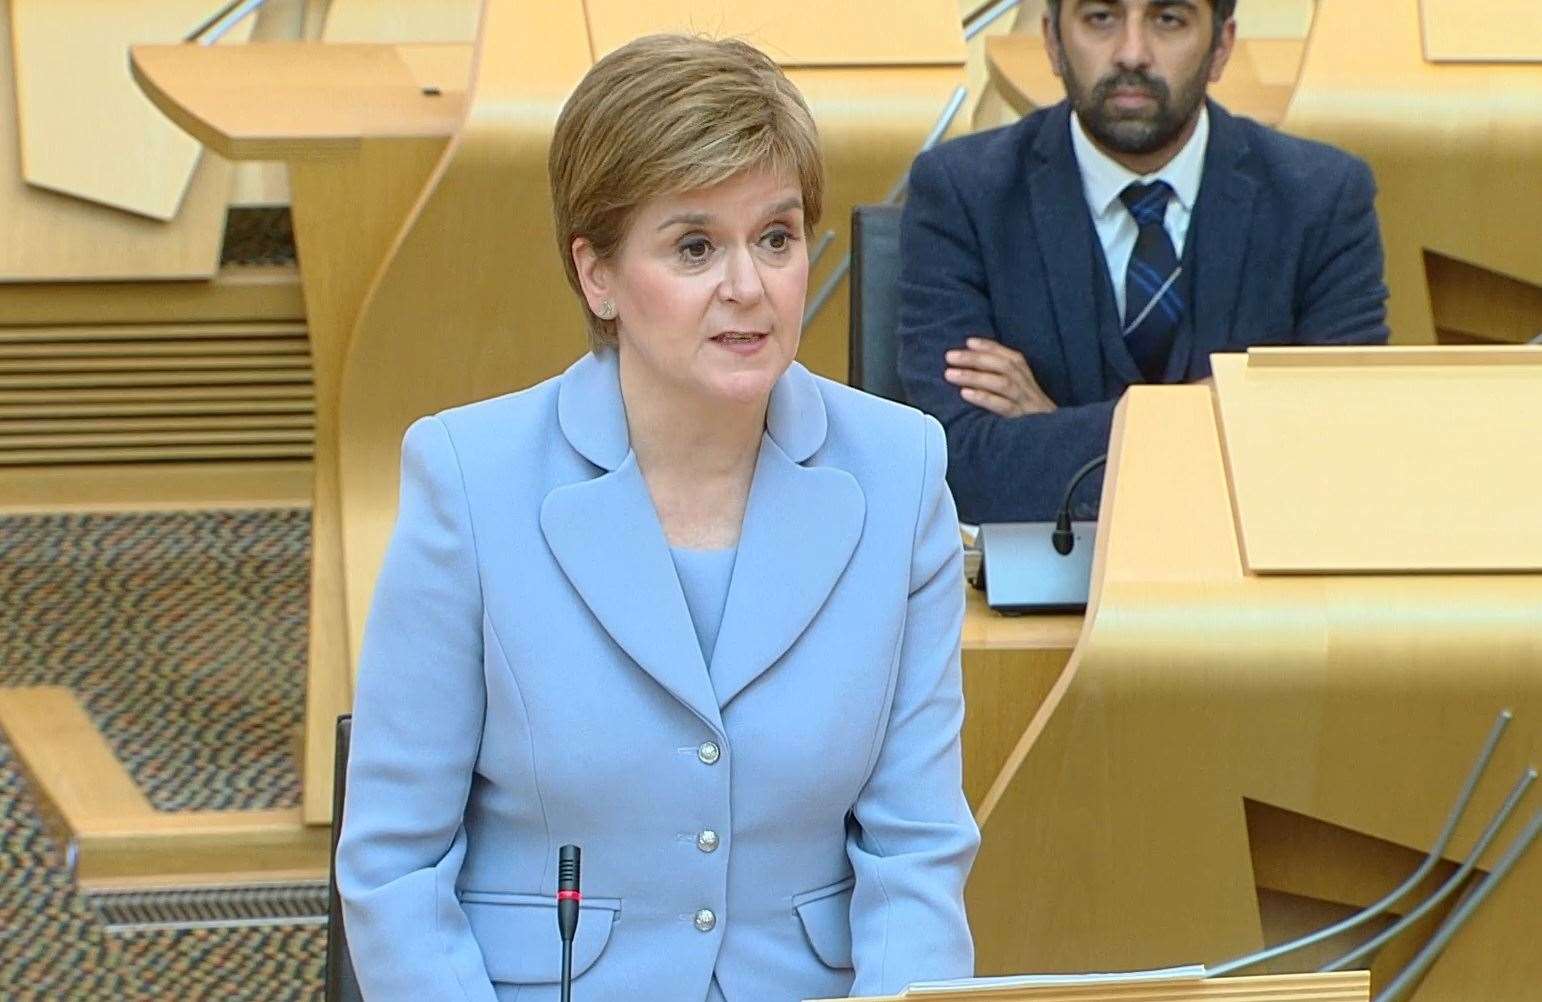 Nicola Sturgeon told the Scottish parliament of the changes on Tuesday.